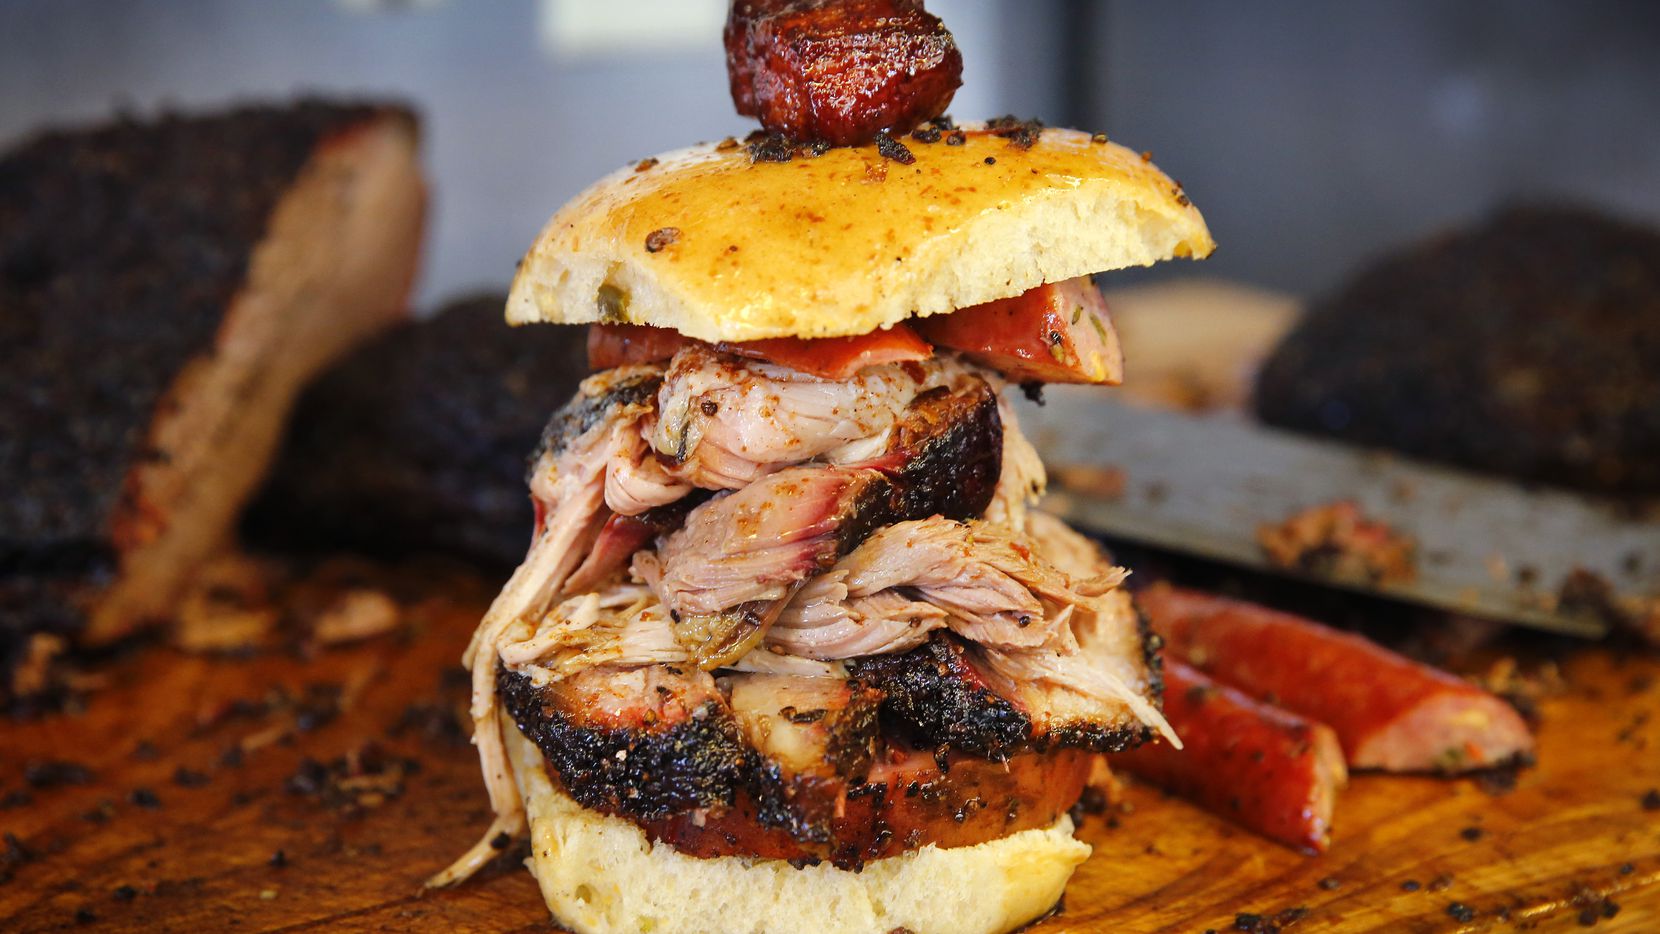 Panther City BBQ co-pitmasters Ernie Morales and Chris Magallanes prepared a Southside Slammer sandwich comprised of (from bottom) smoked bologna, brisket, pulled pork, jalape–o cheese sausage and topped with pork belly.